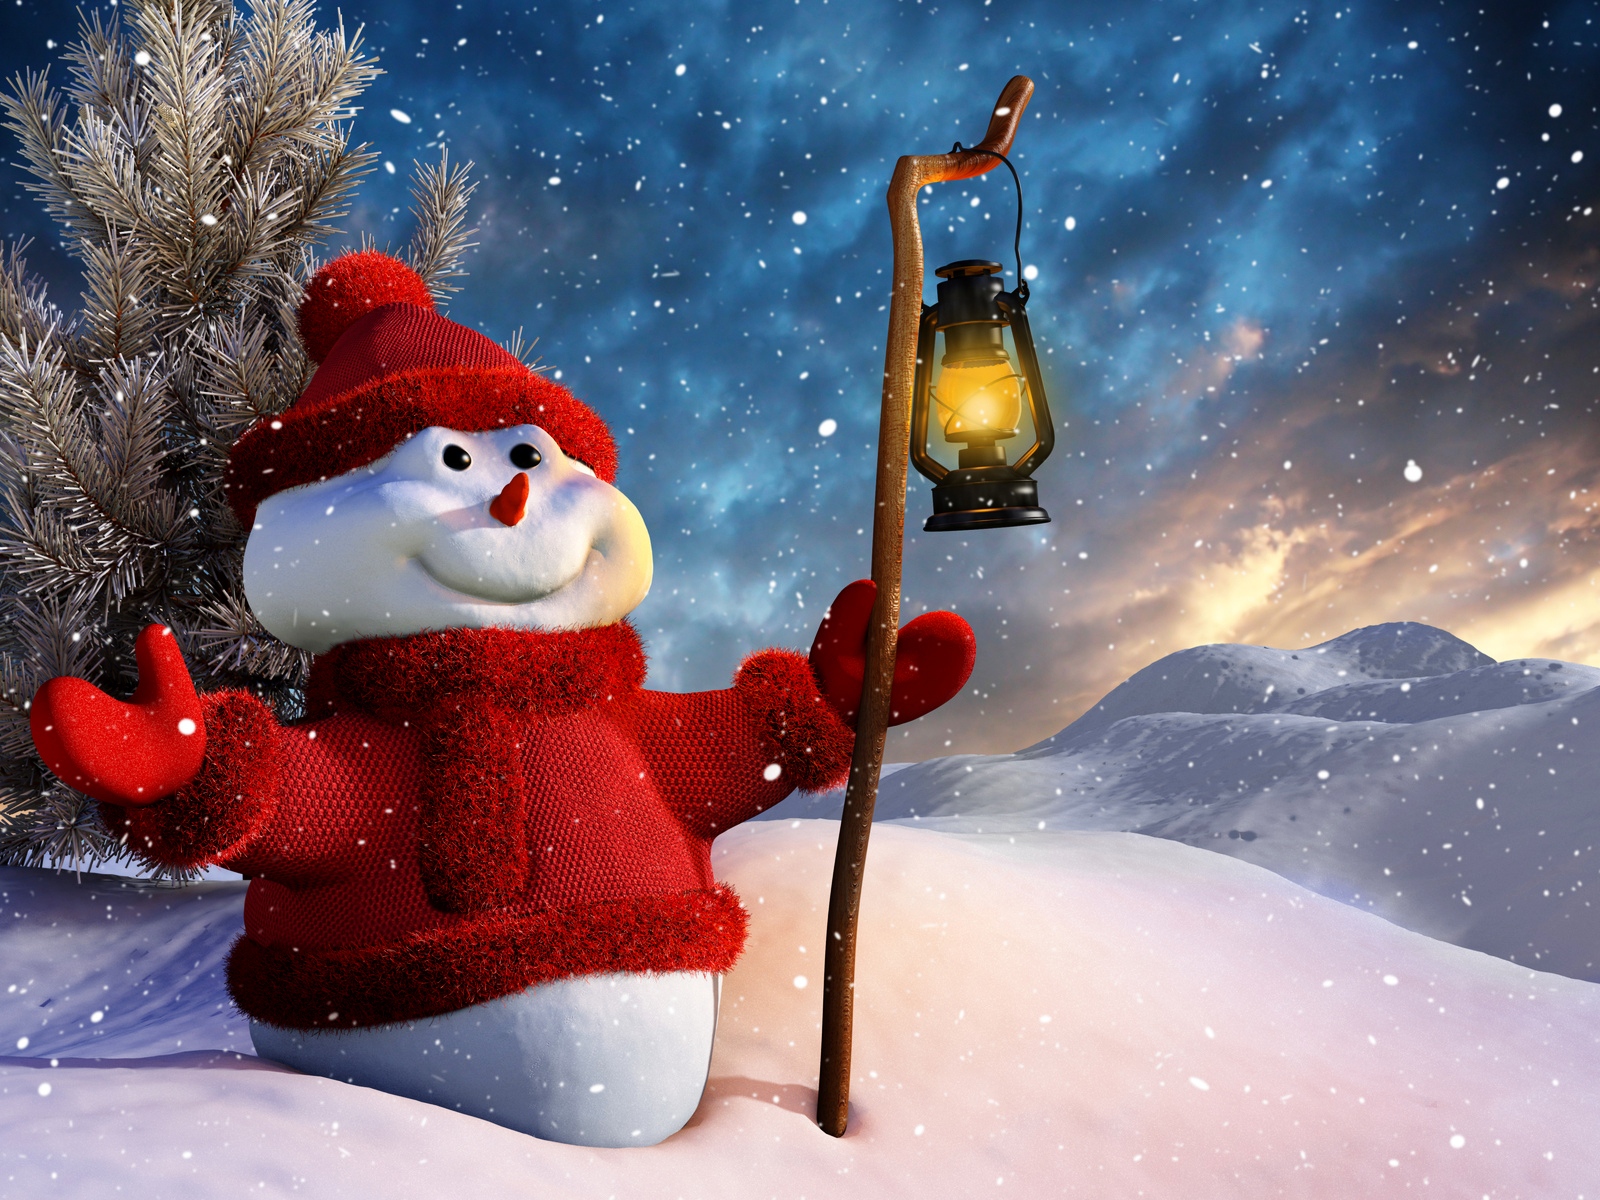 Cute Snowman Winter HD Wallpapers Download Wallpapers in HD for 1600x1200